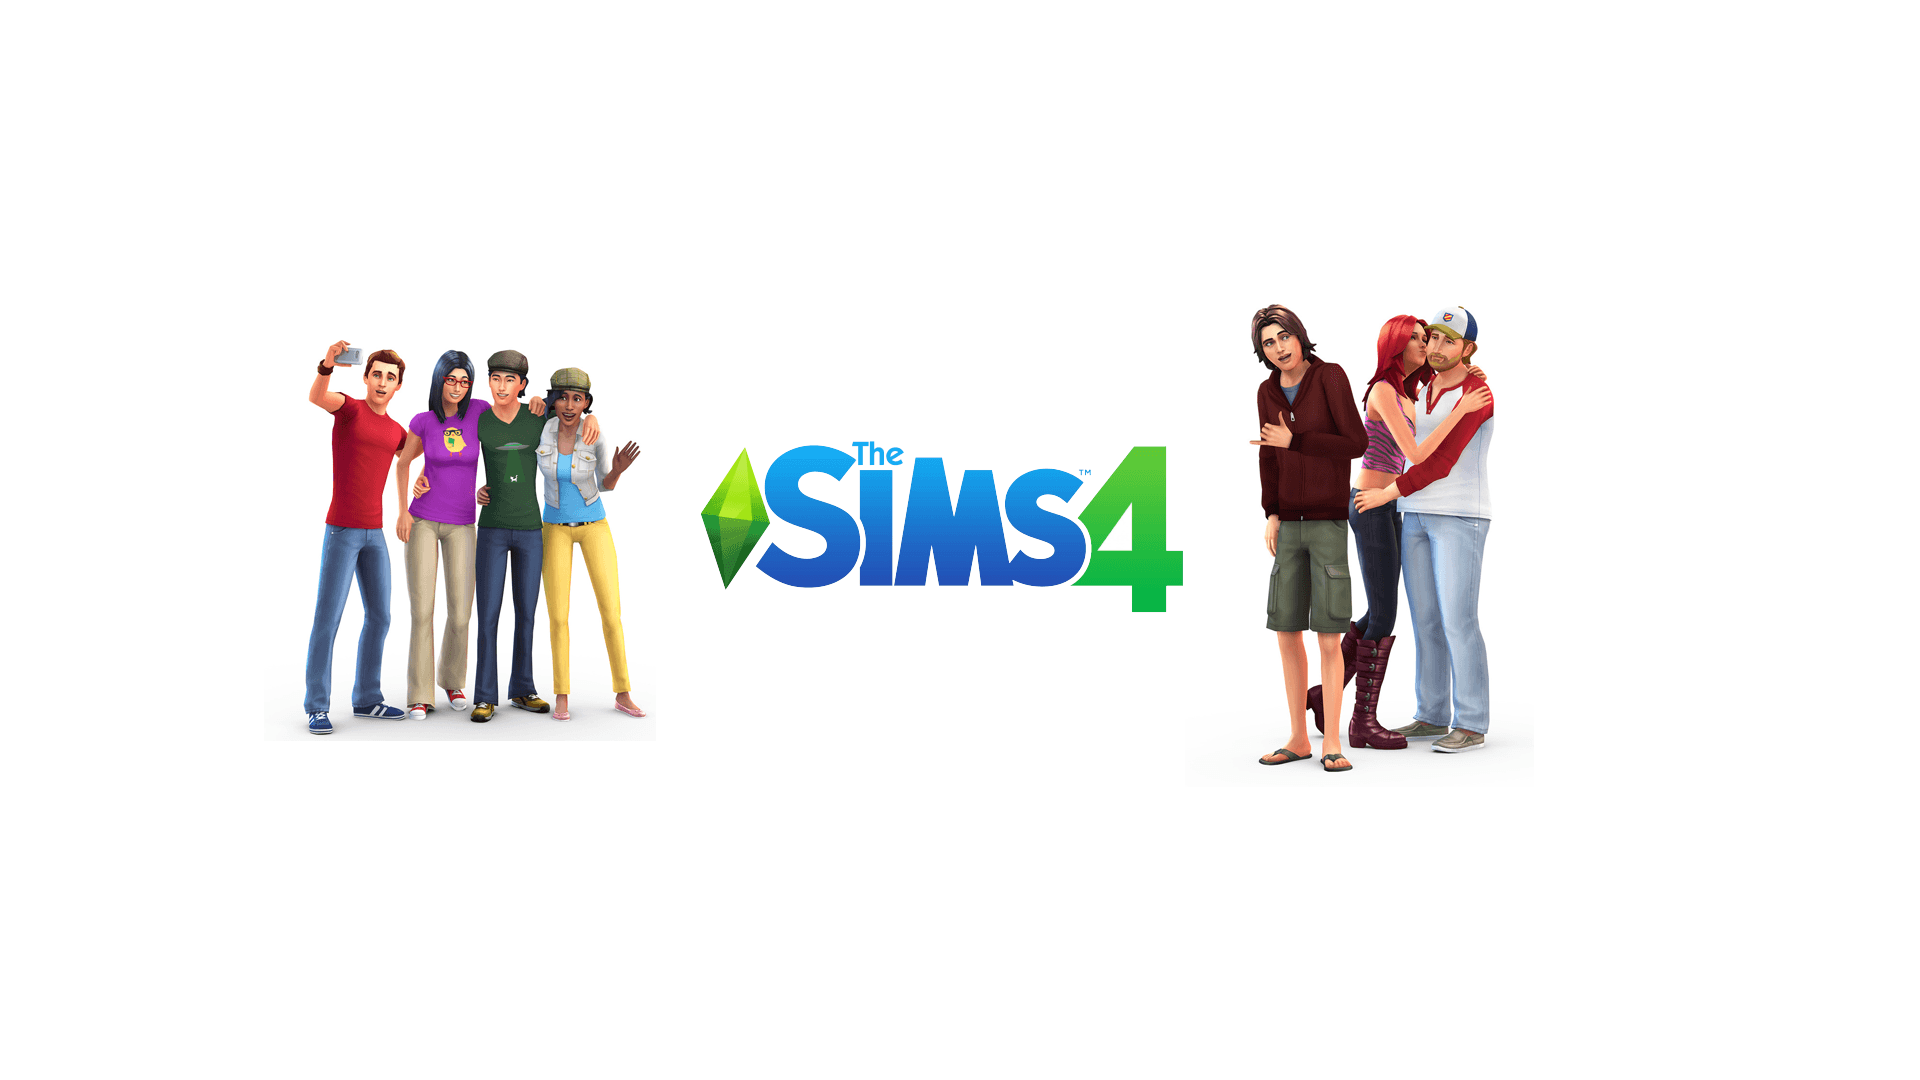 The Sims 4 Wallpaper.png